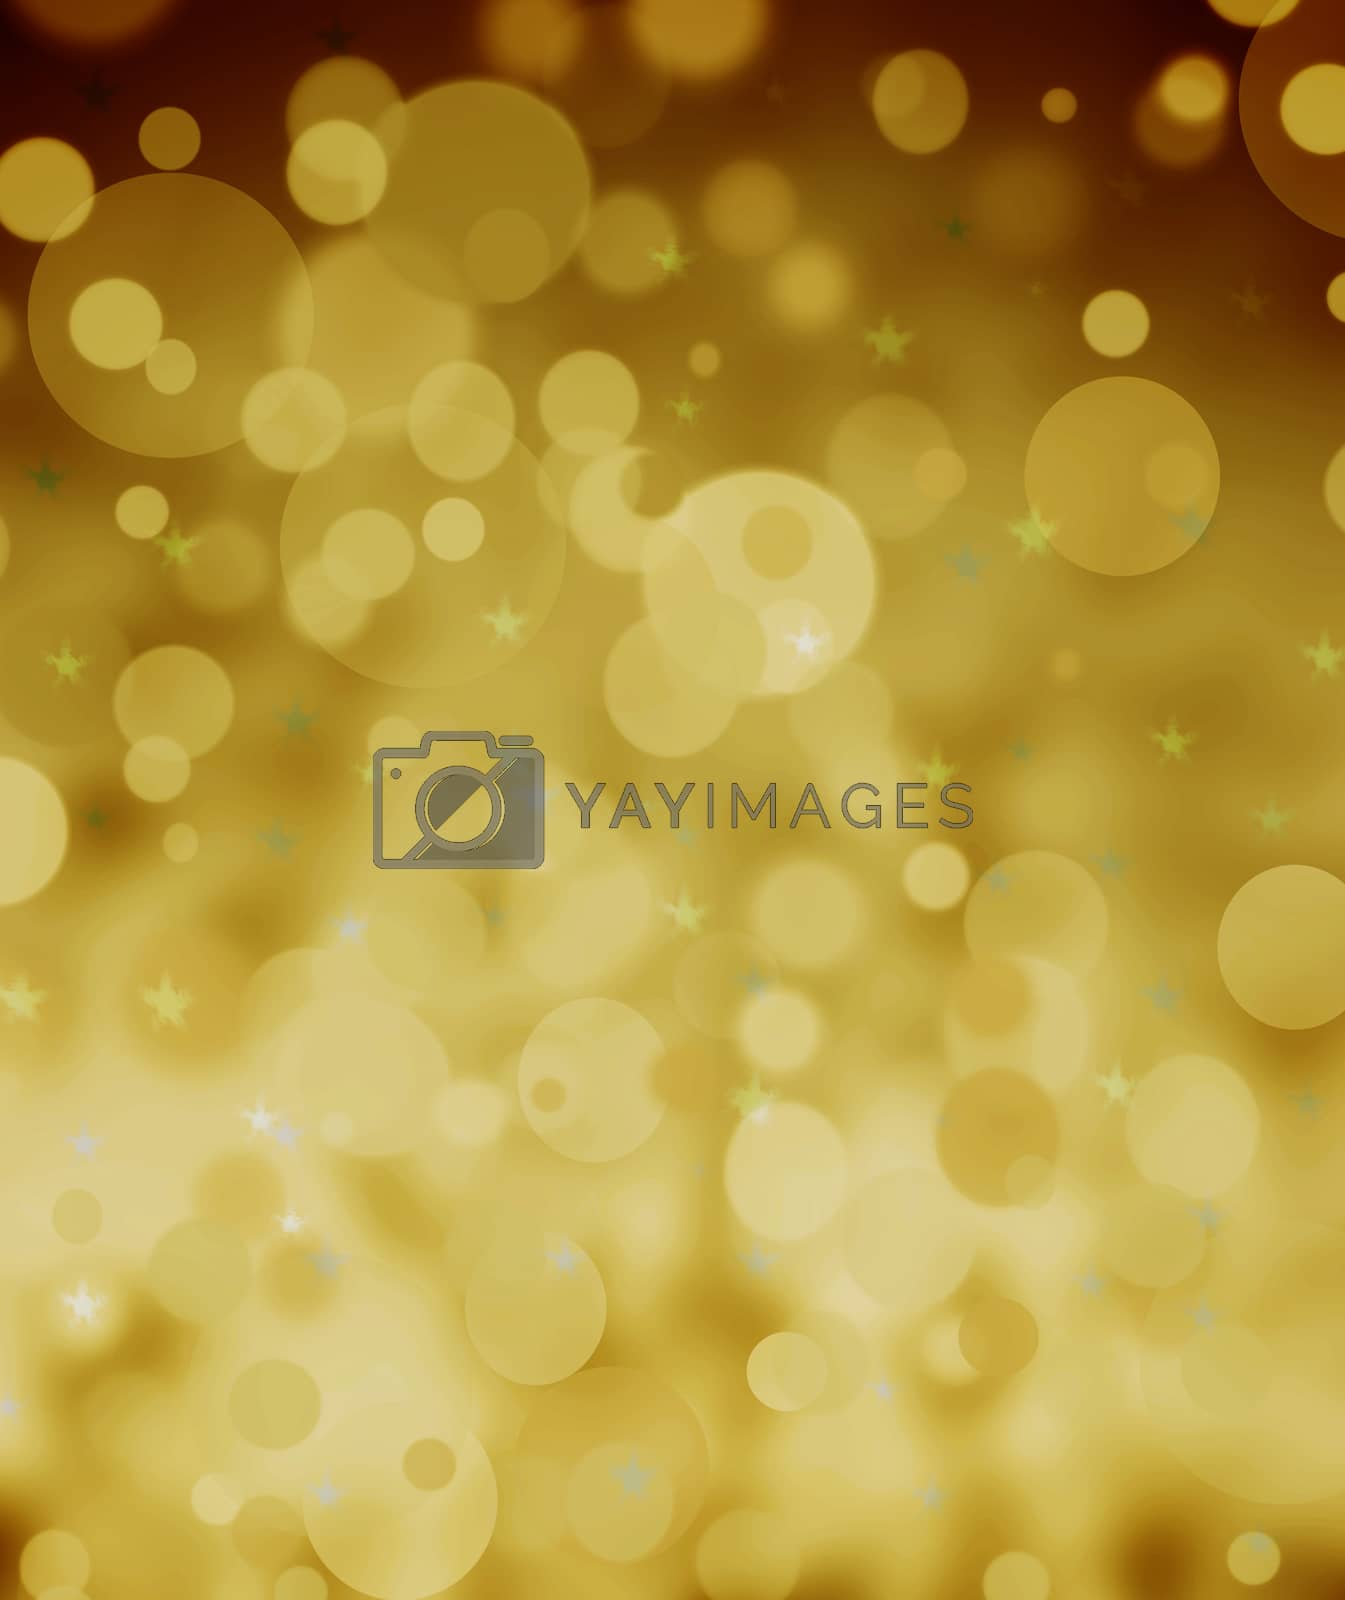 Royalty free image of christmas bokeh background by sarkao